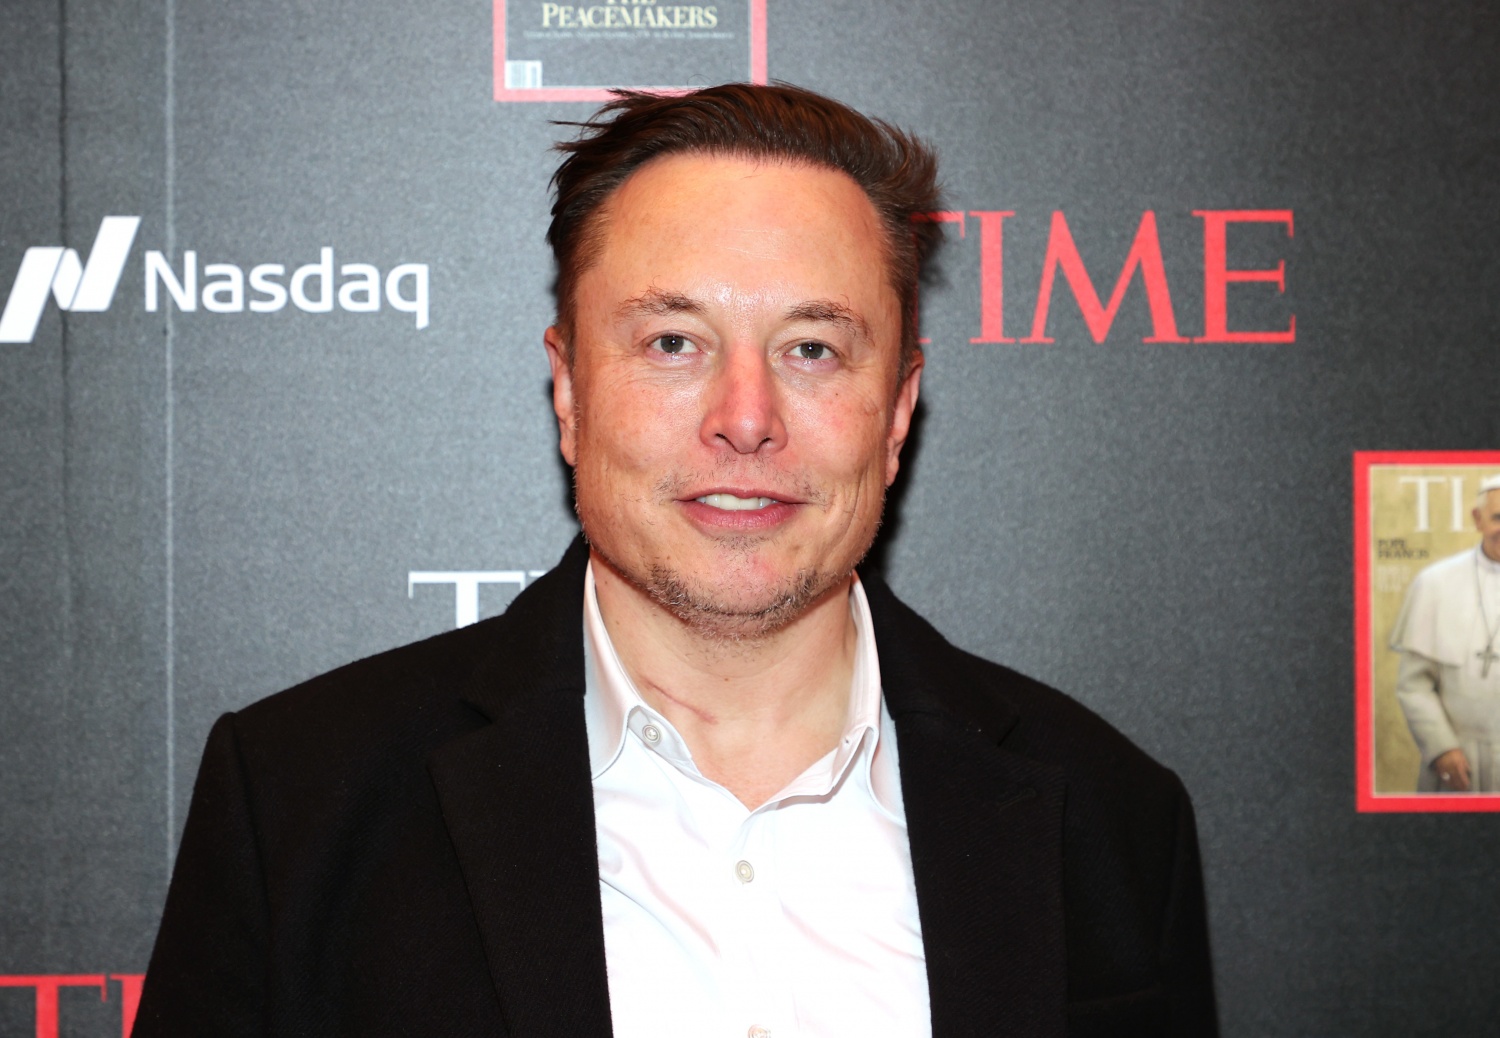 Elon Musk Time Person of the Year